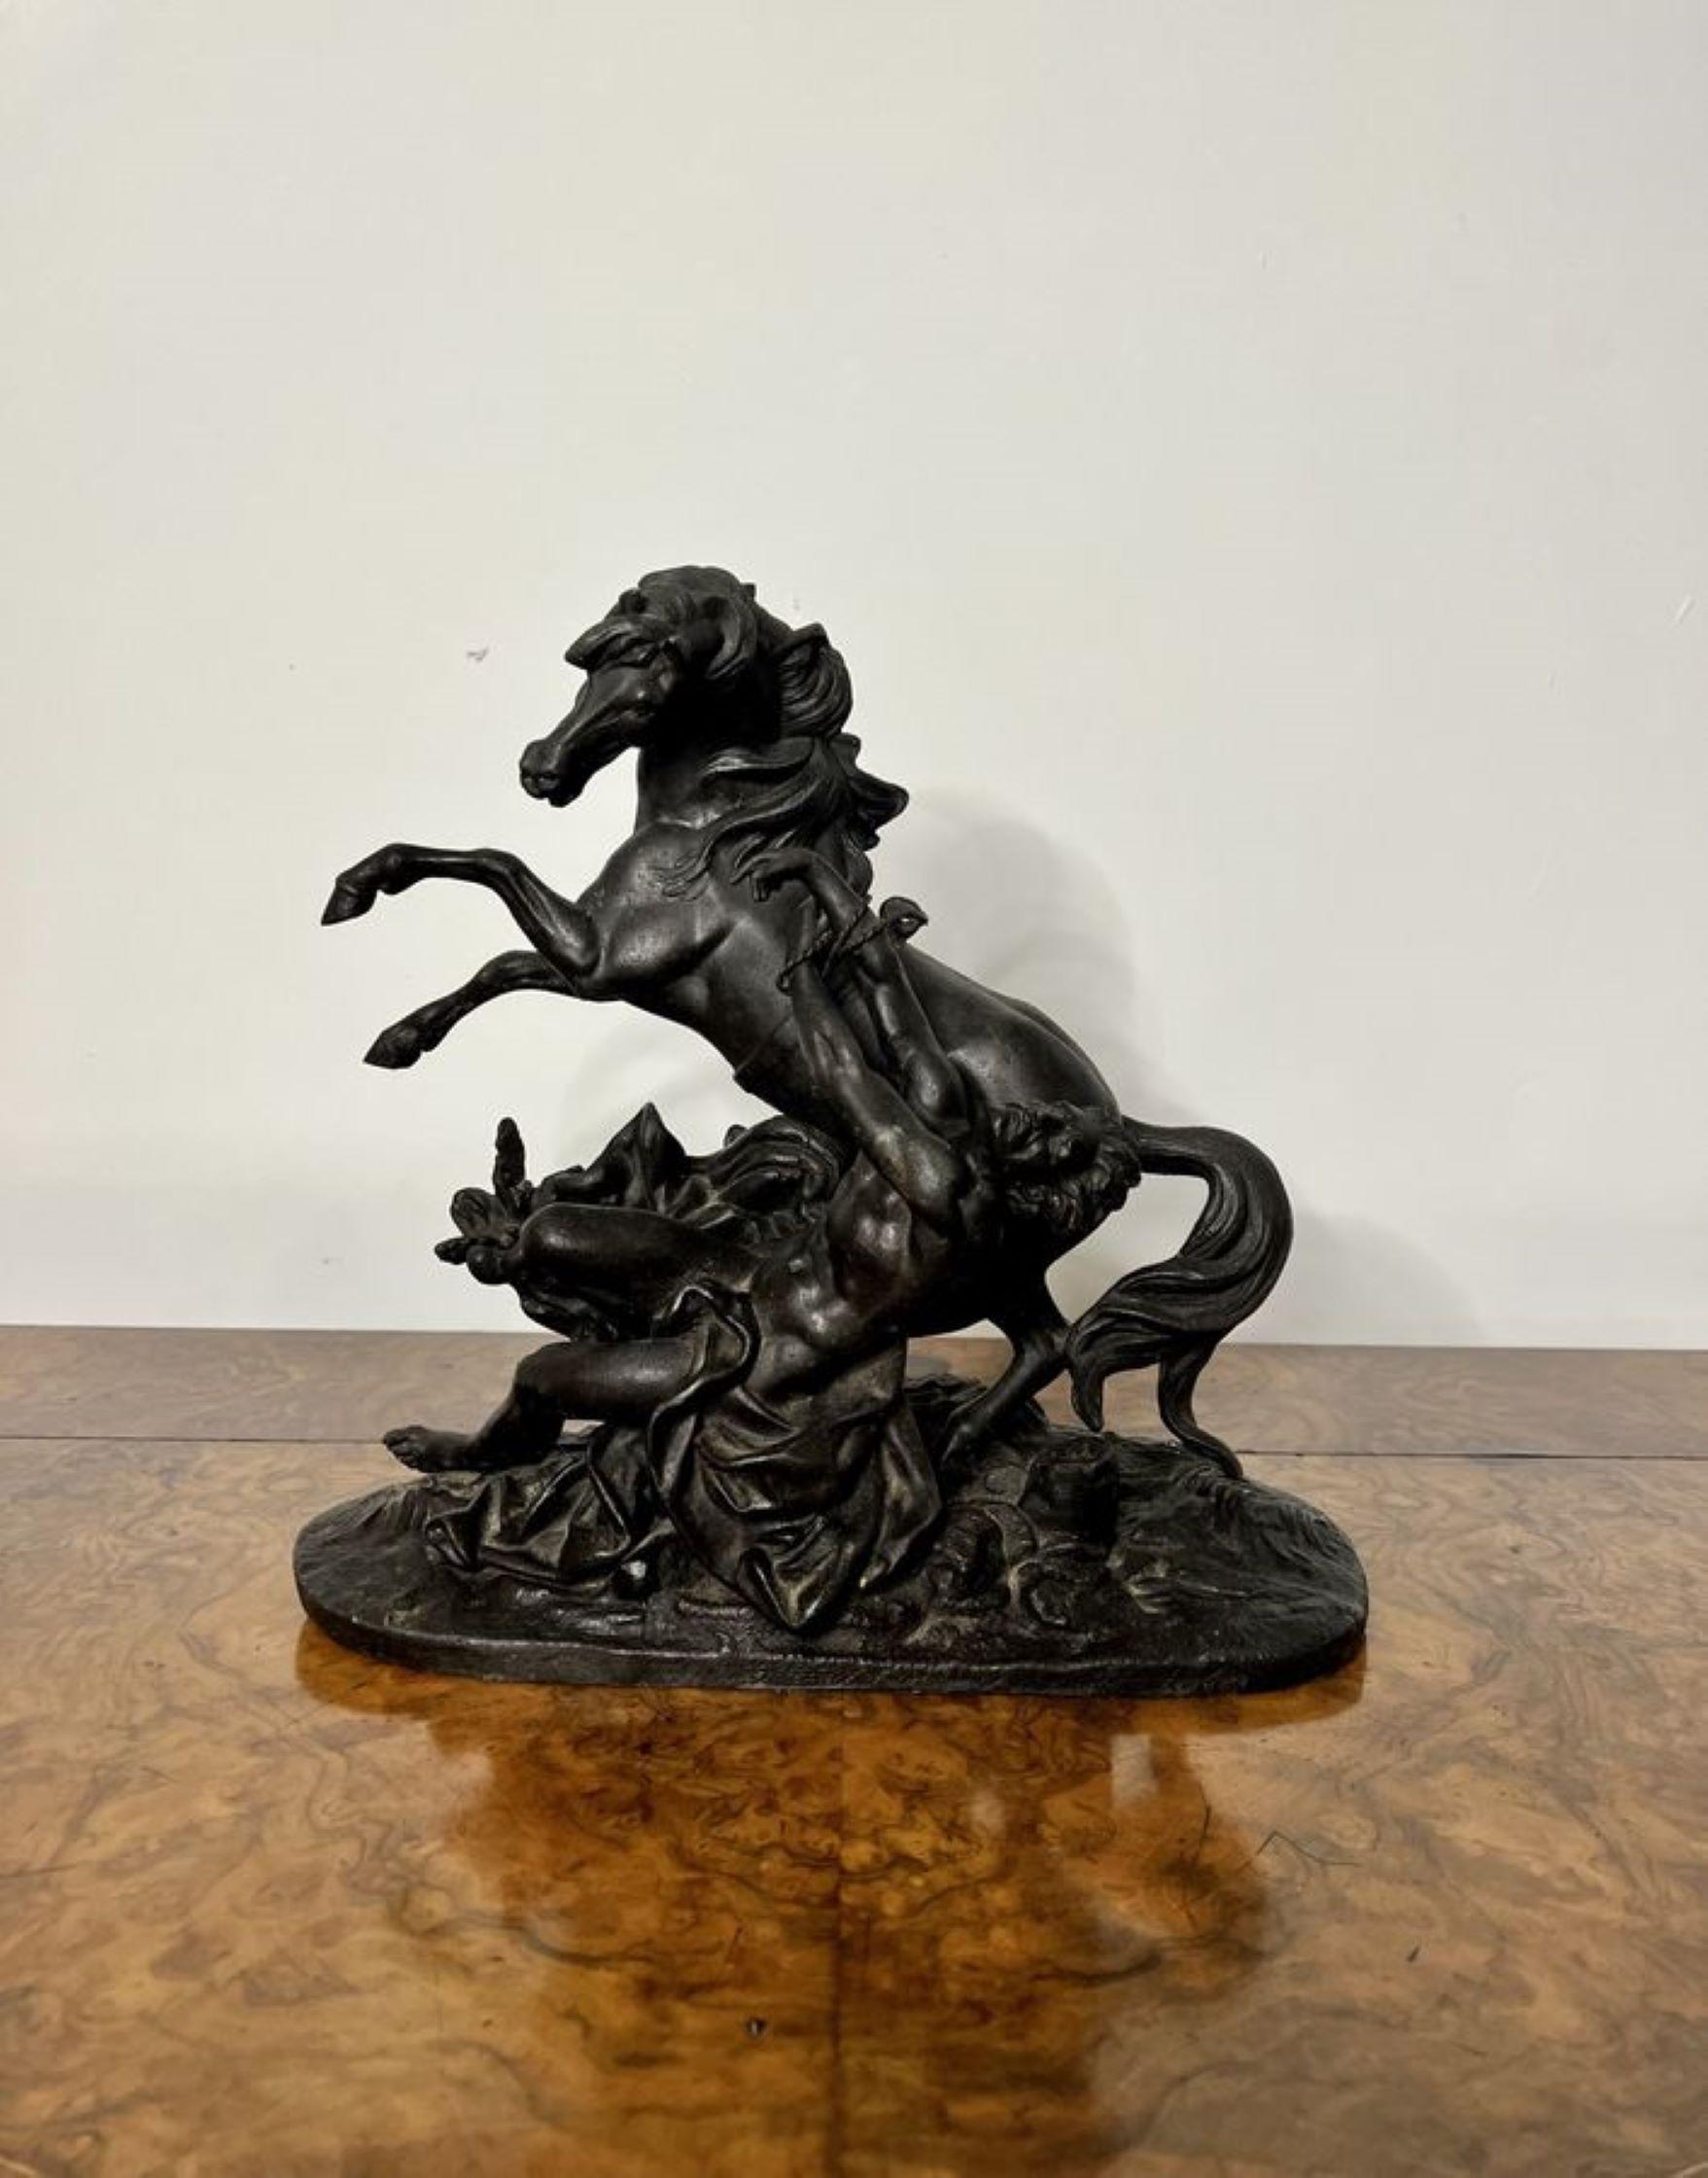 Quality antique Victorian spelter figure of a classical scene of a galloping horse and male figure surrounded by foliage on an oval base.

D. 1860